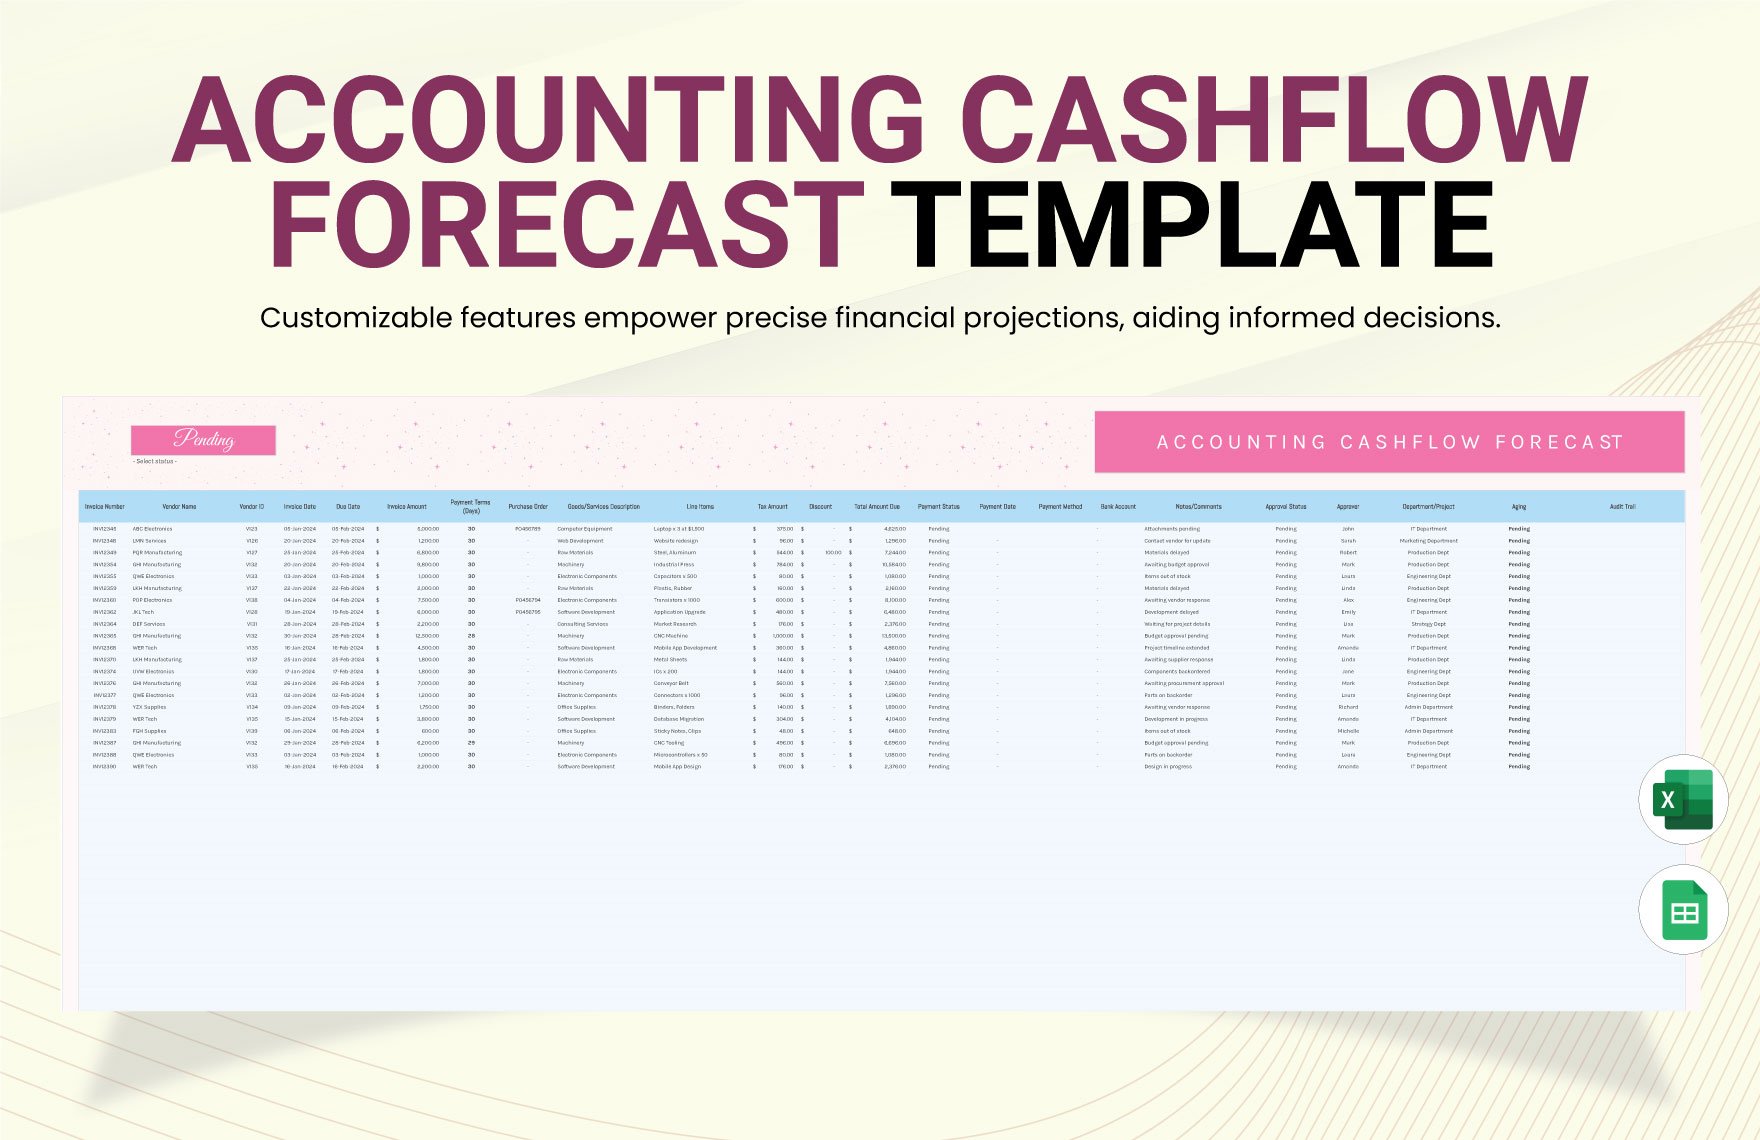 Accounting Cashflow Forecast Template